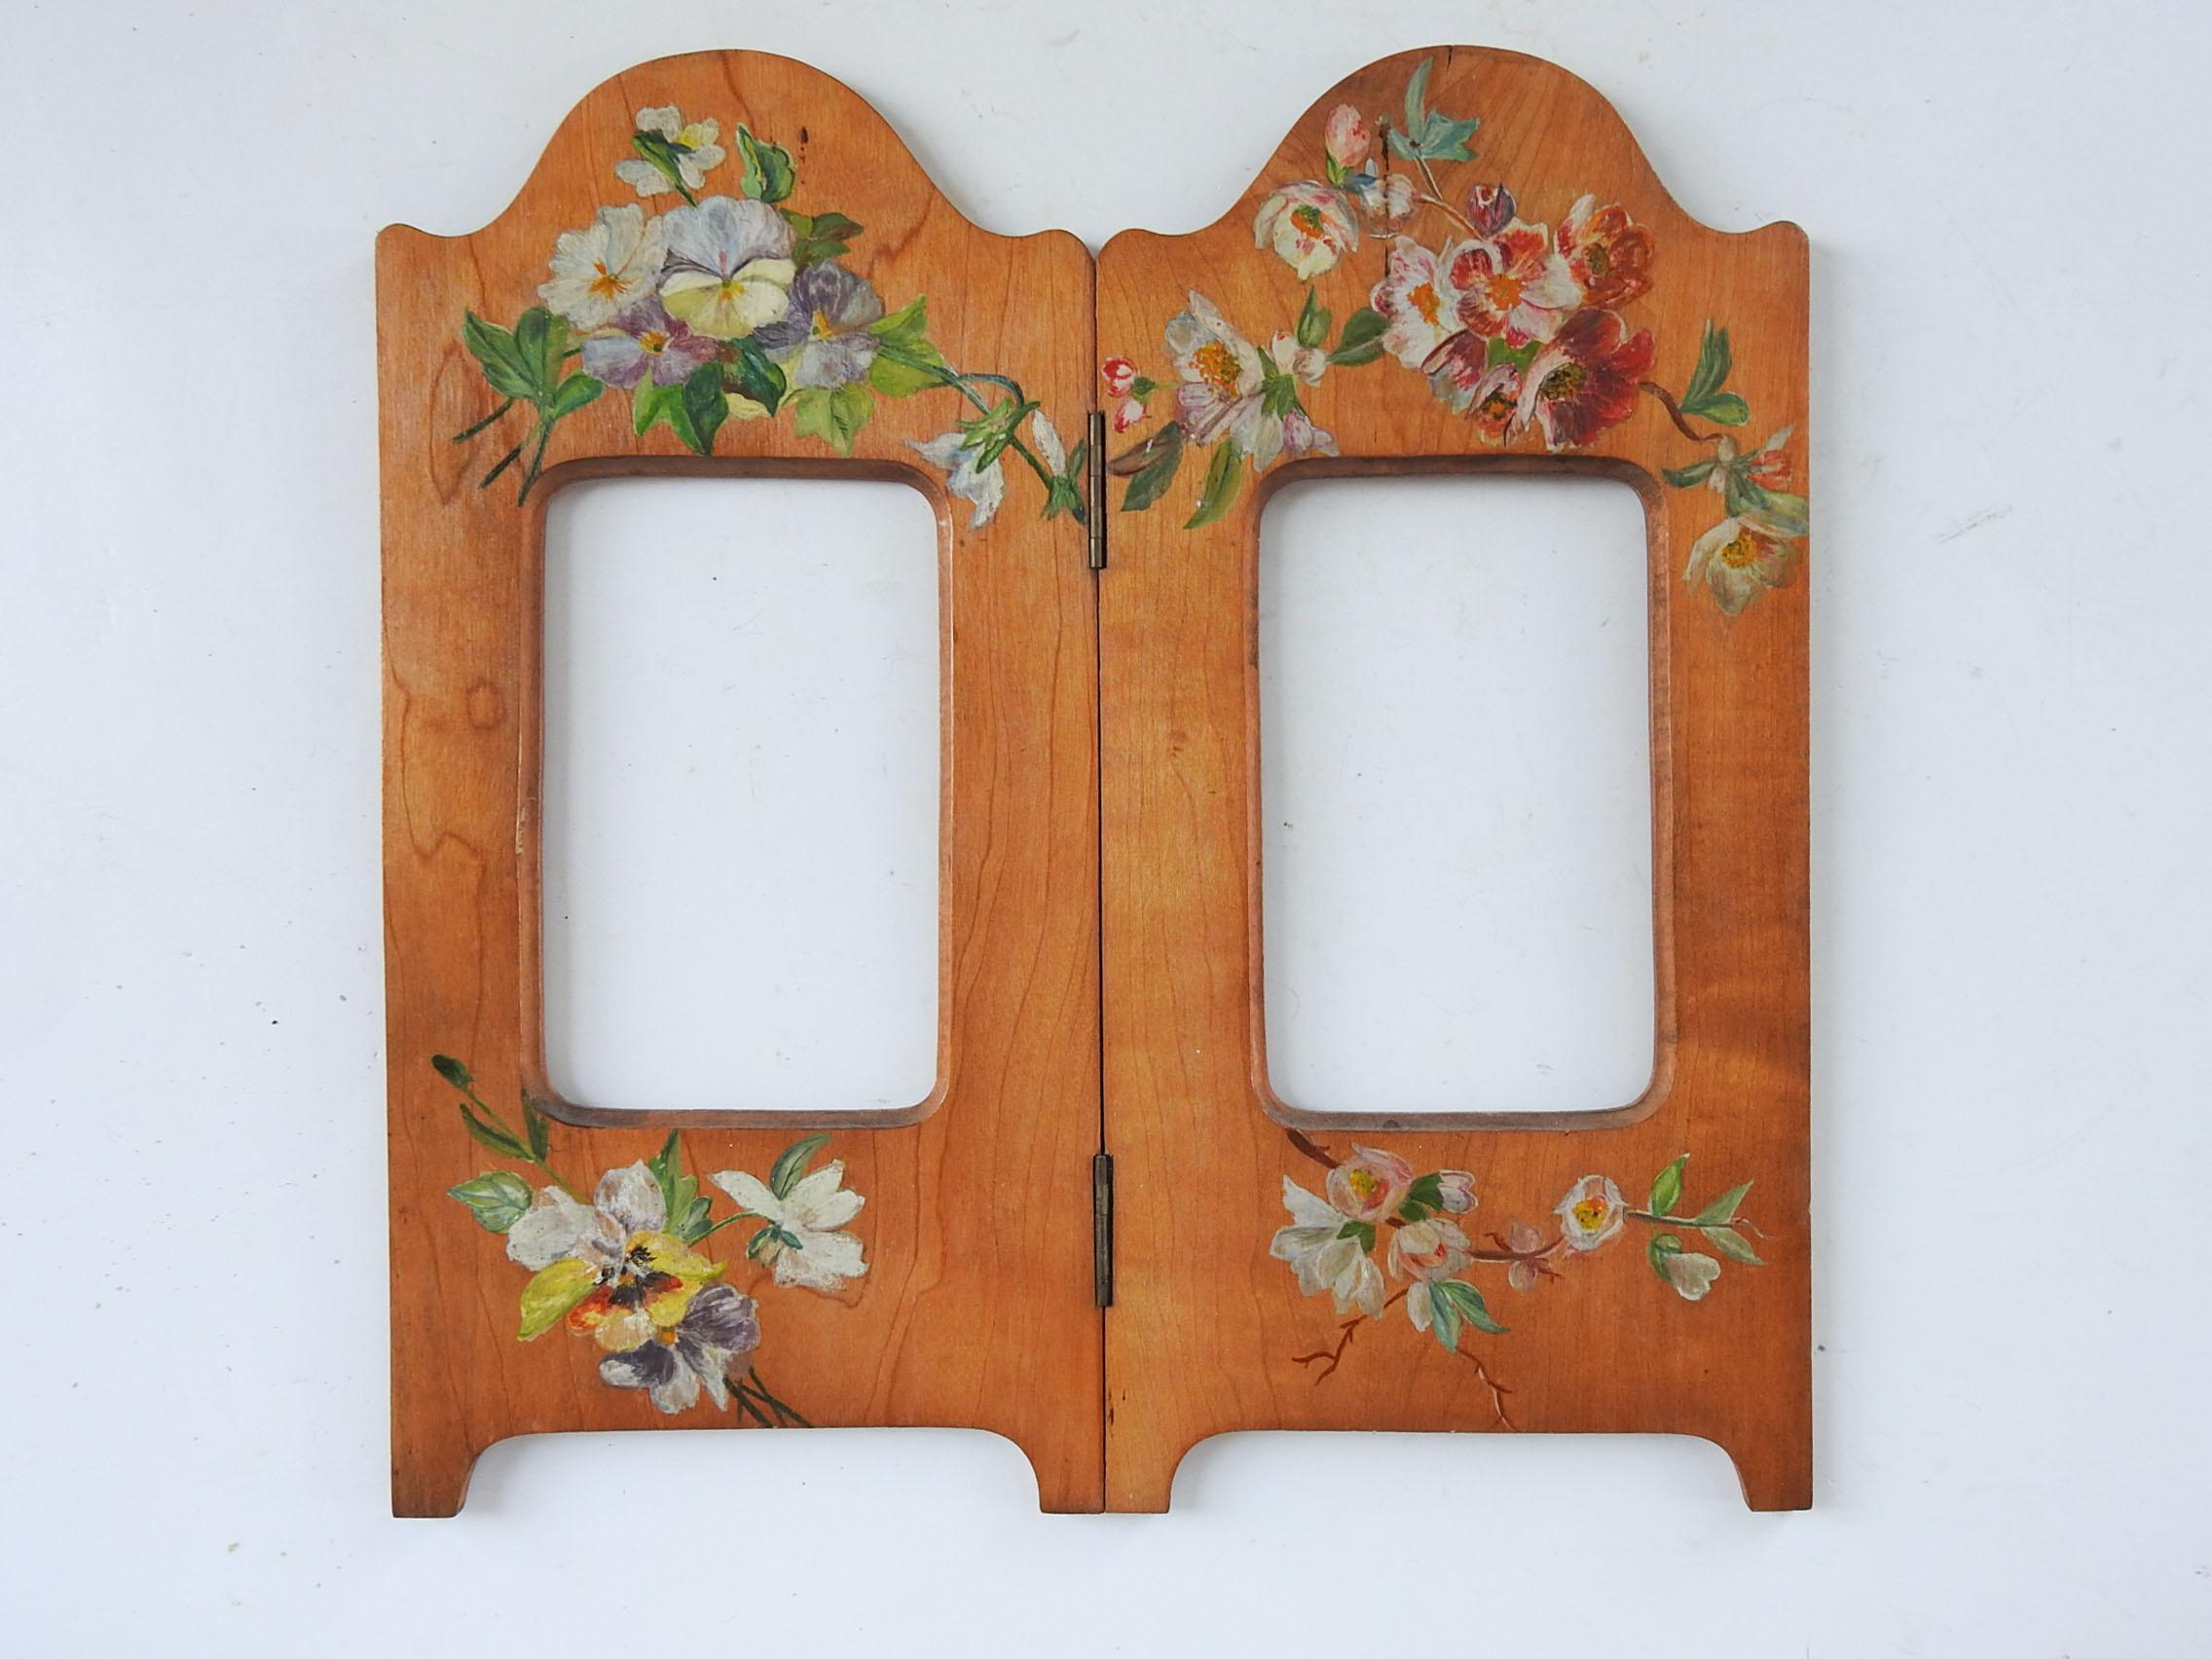 Antique hinged wood double picture frame with hand painted flowers.  Pansies, primrose and apple blossoms.  Openings are 3.5